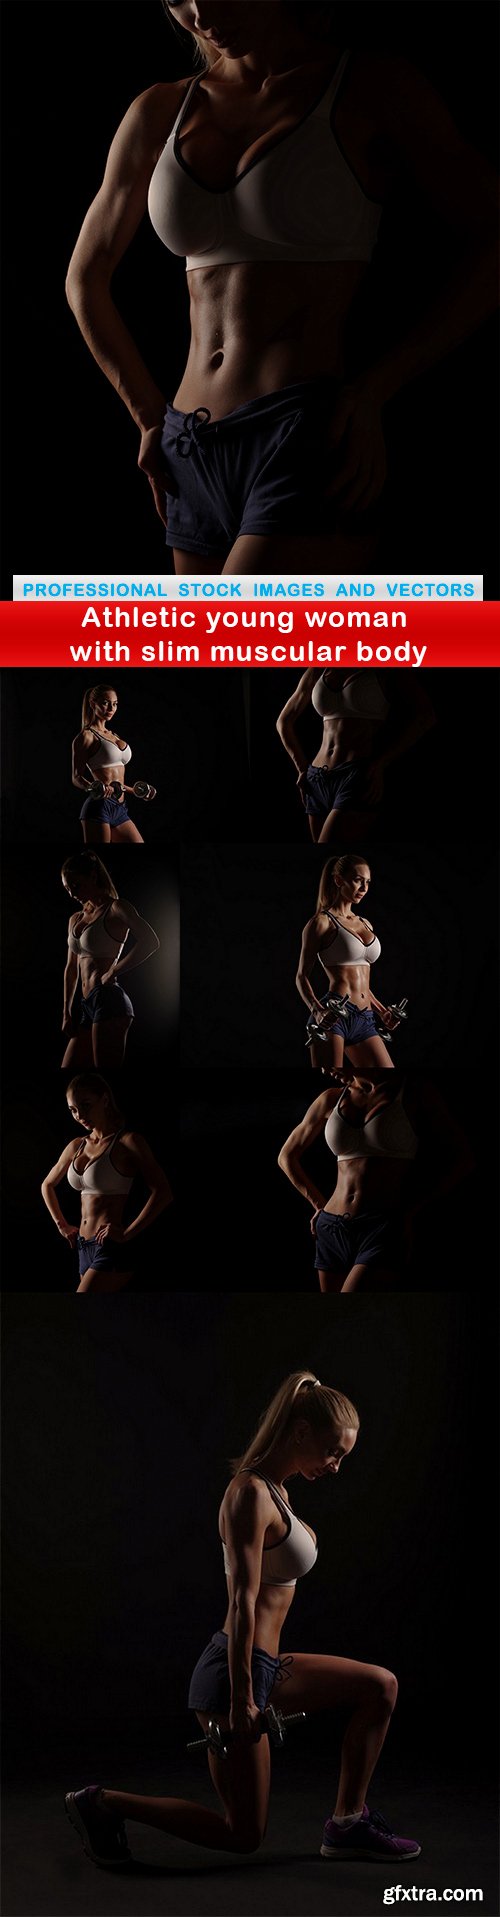 Athletic young woman with slim muscular body - 8 UHQ JPEG